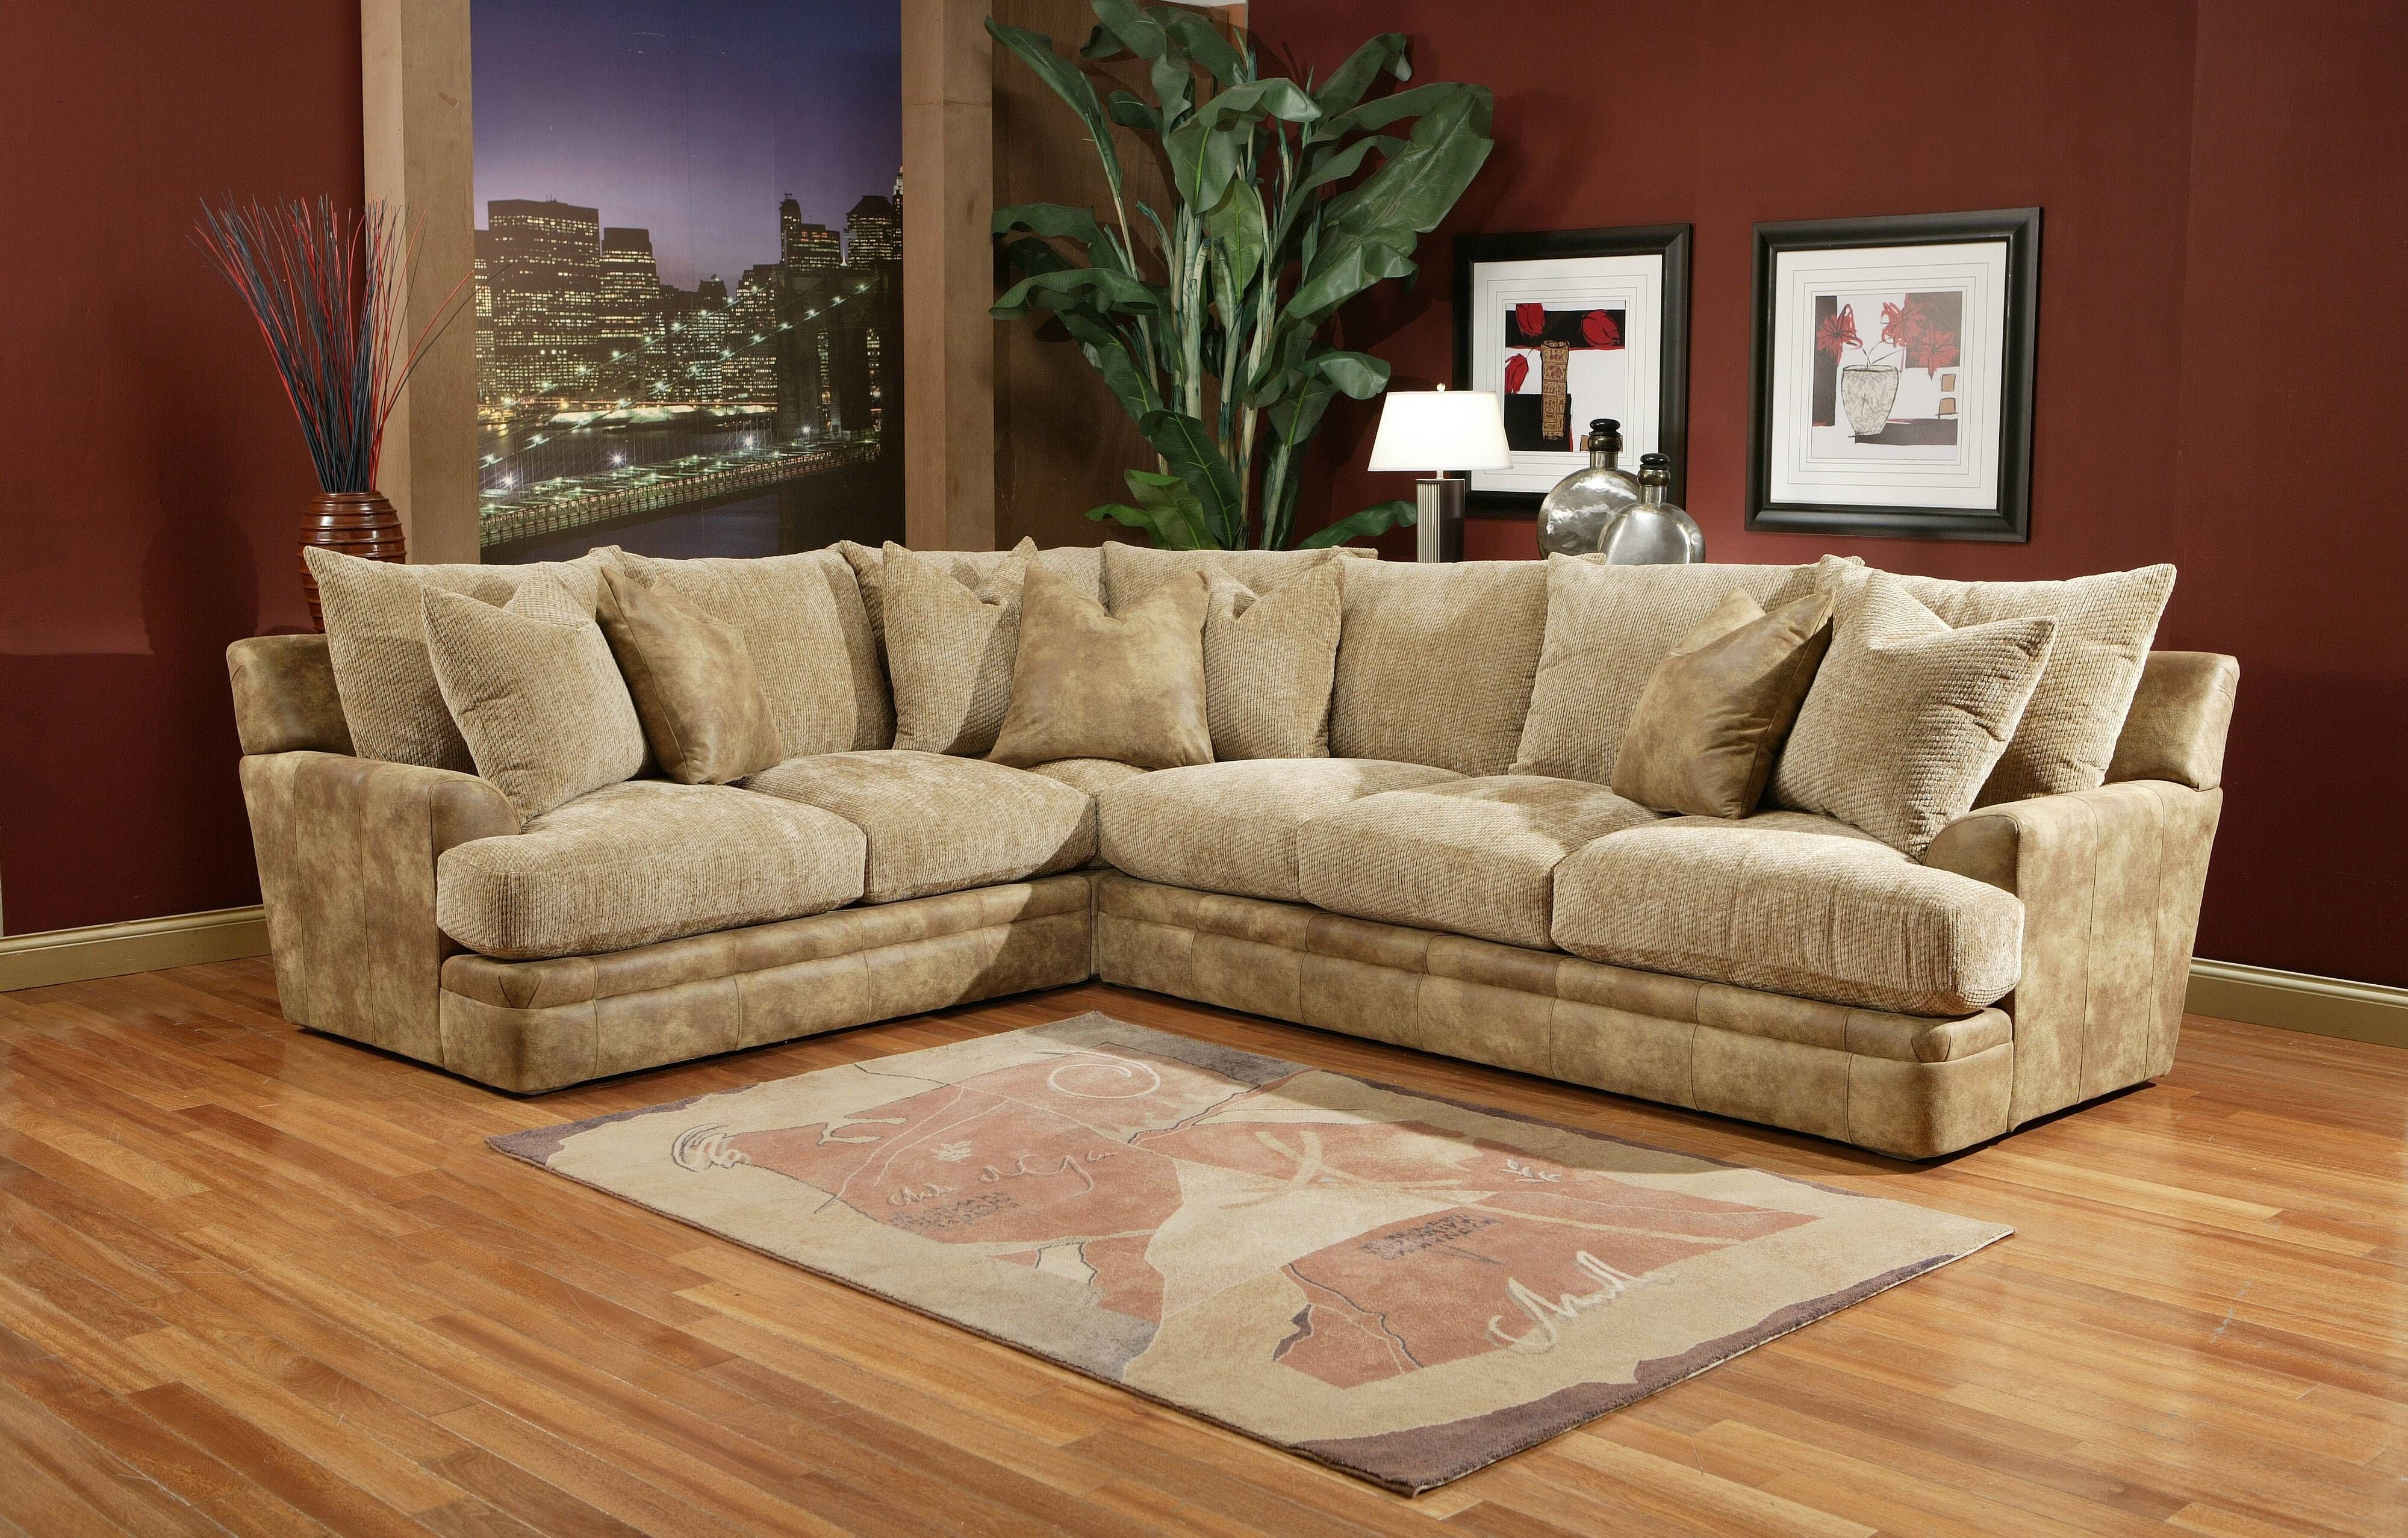 Sofas Center Down Sectional Sofa Excellent Imagesoncept Brooke Throughout Down Sectional Sofa (View 2 of 25)